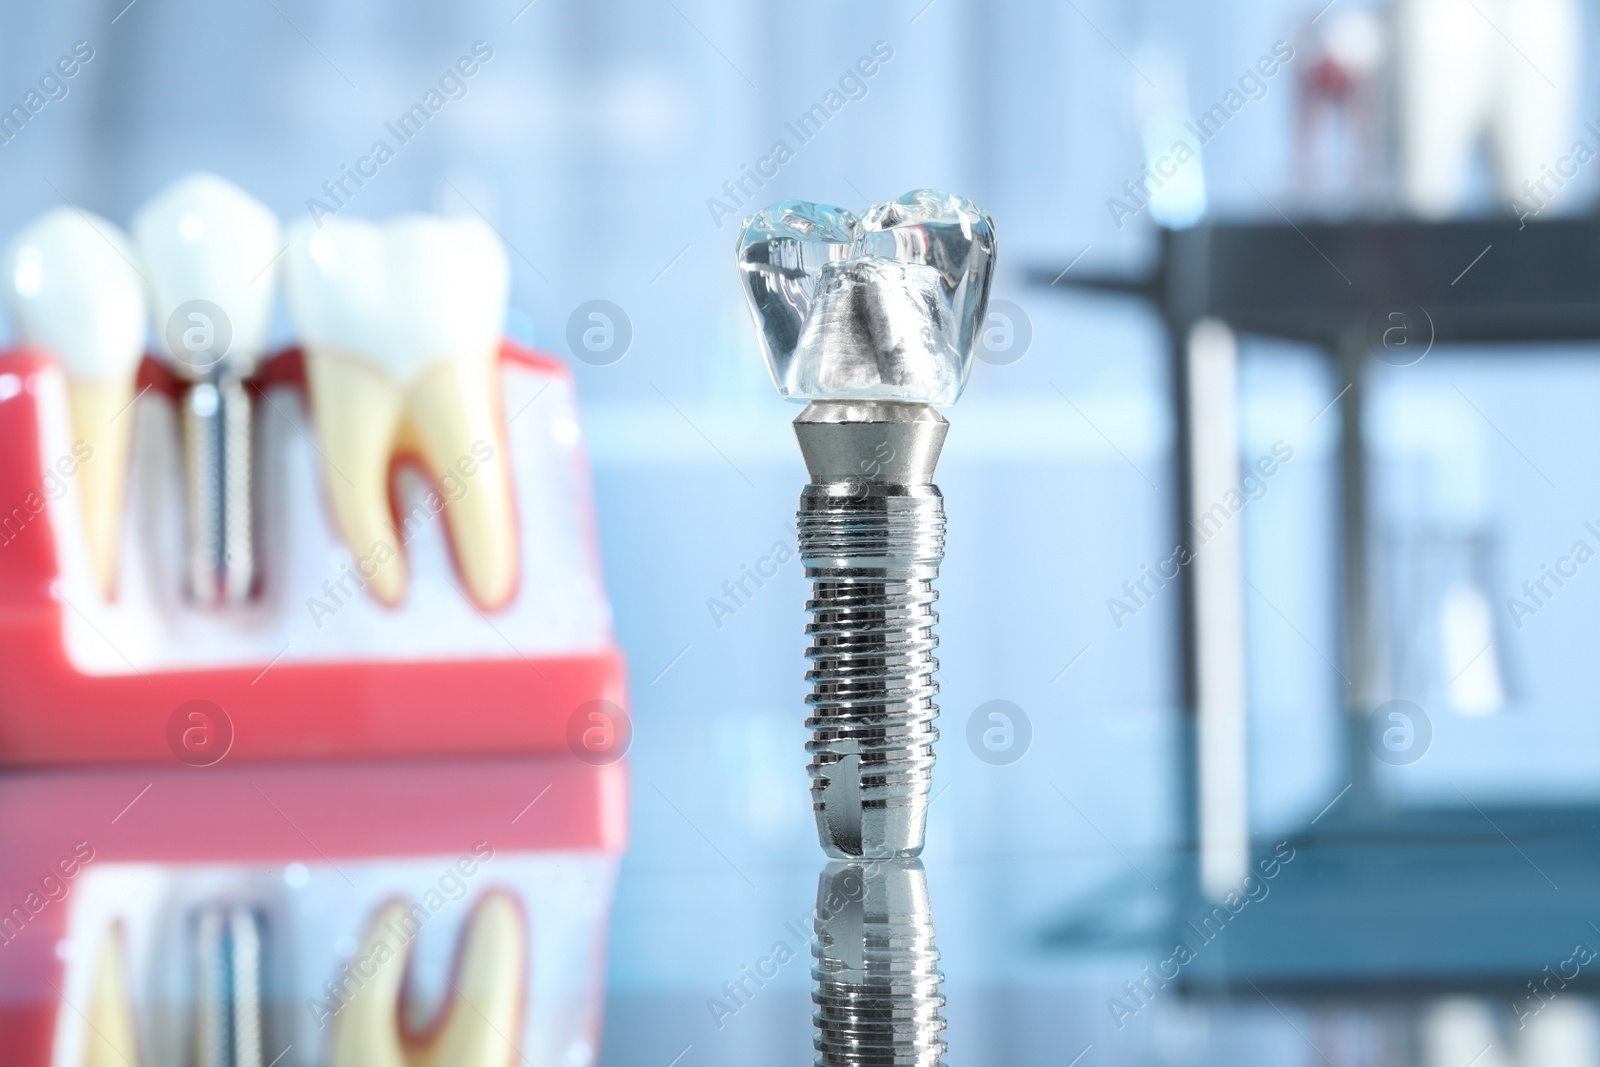 Photo of Educational model of dental implant on blurred background